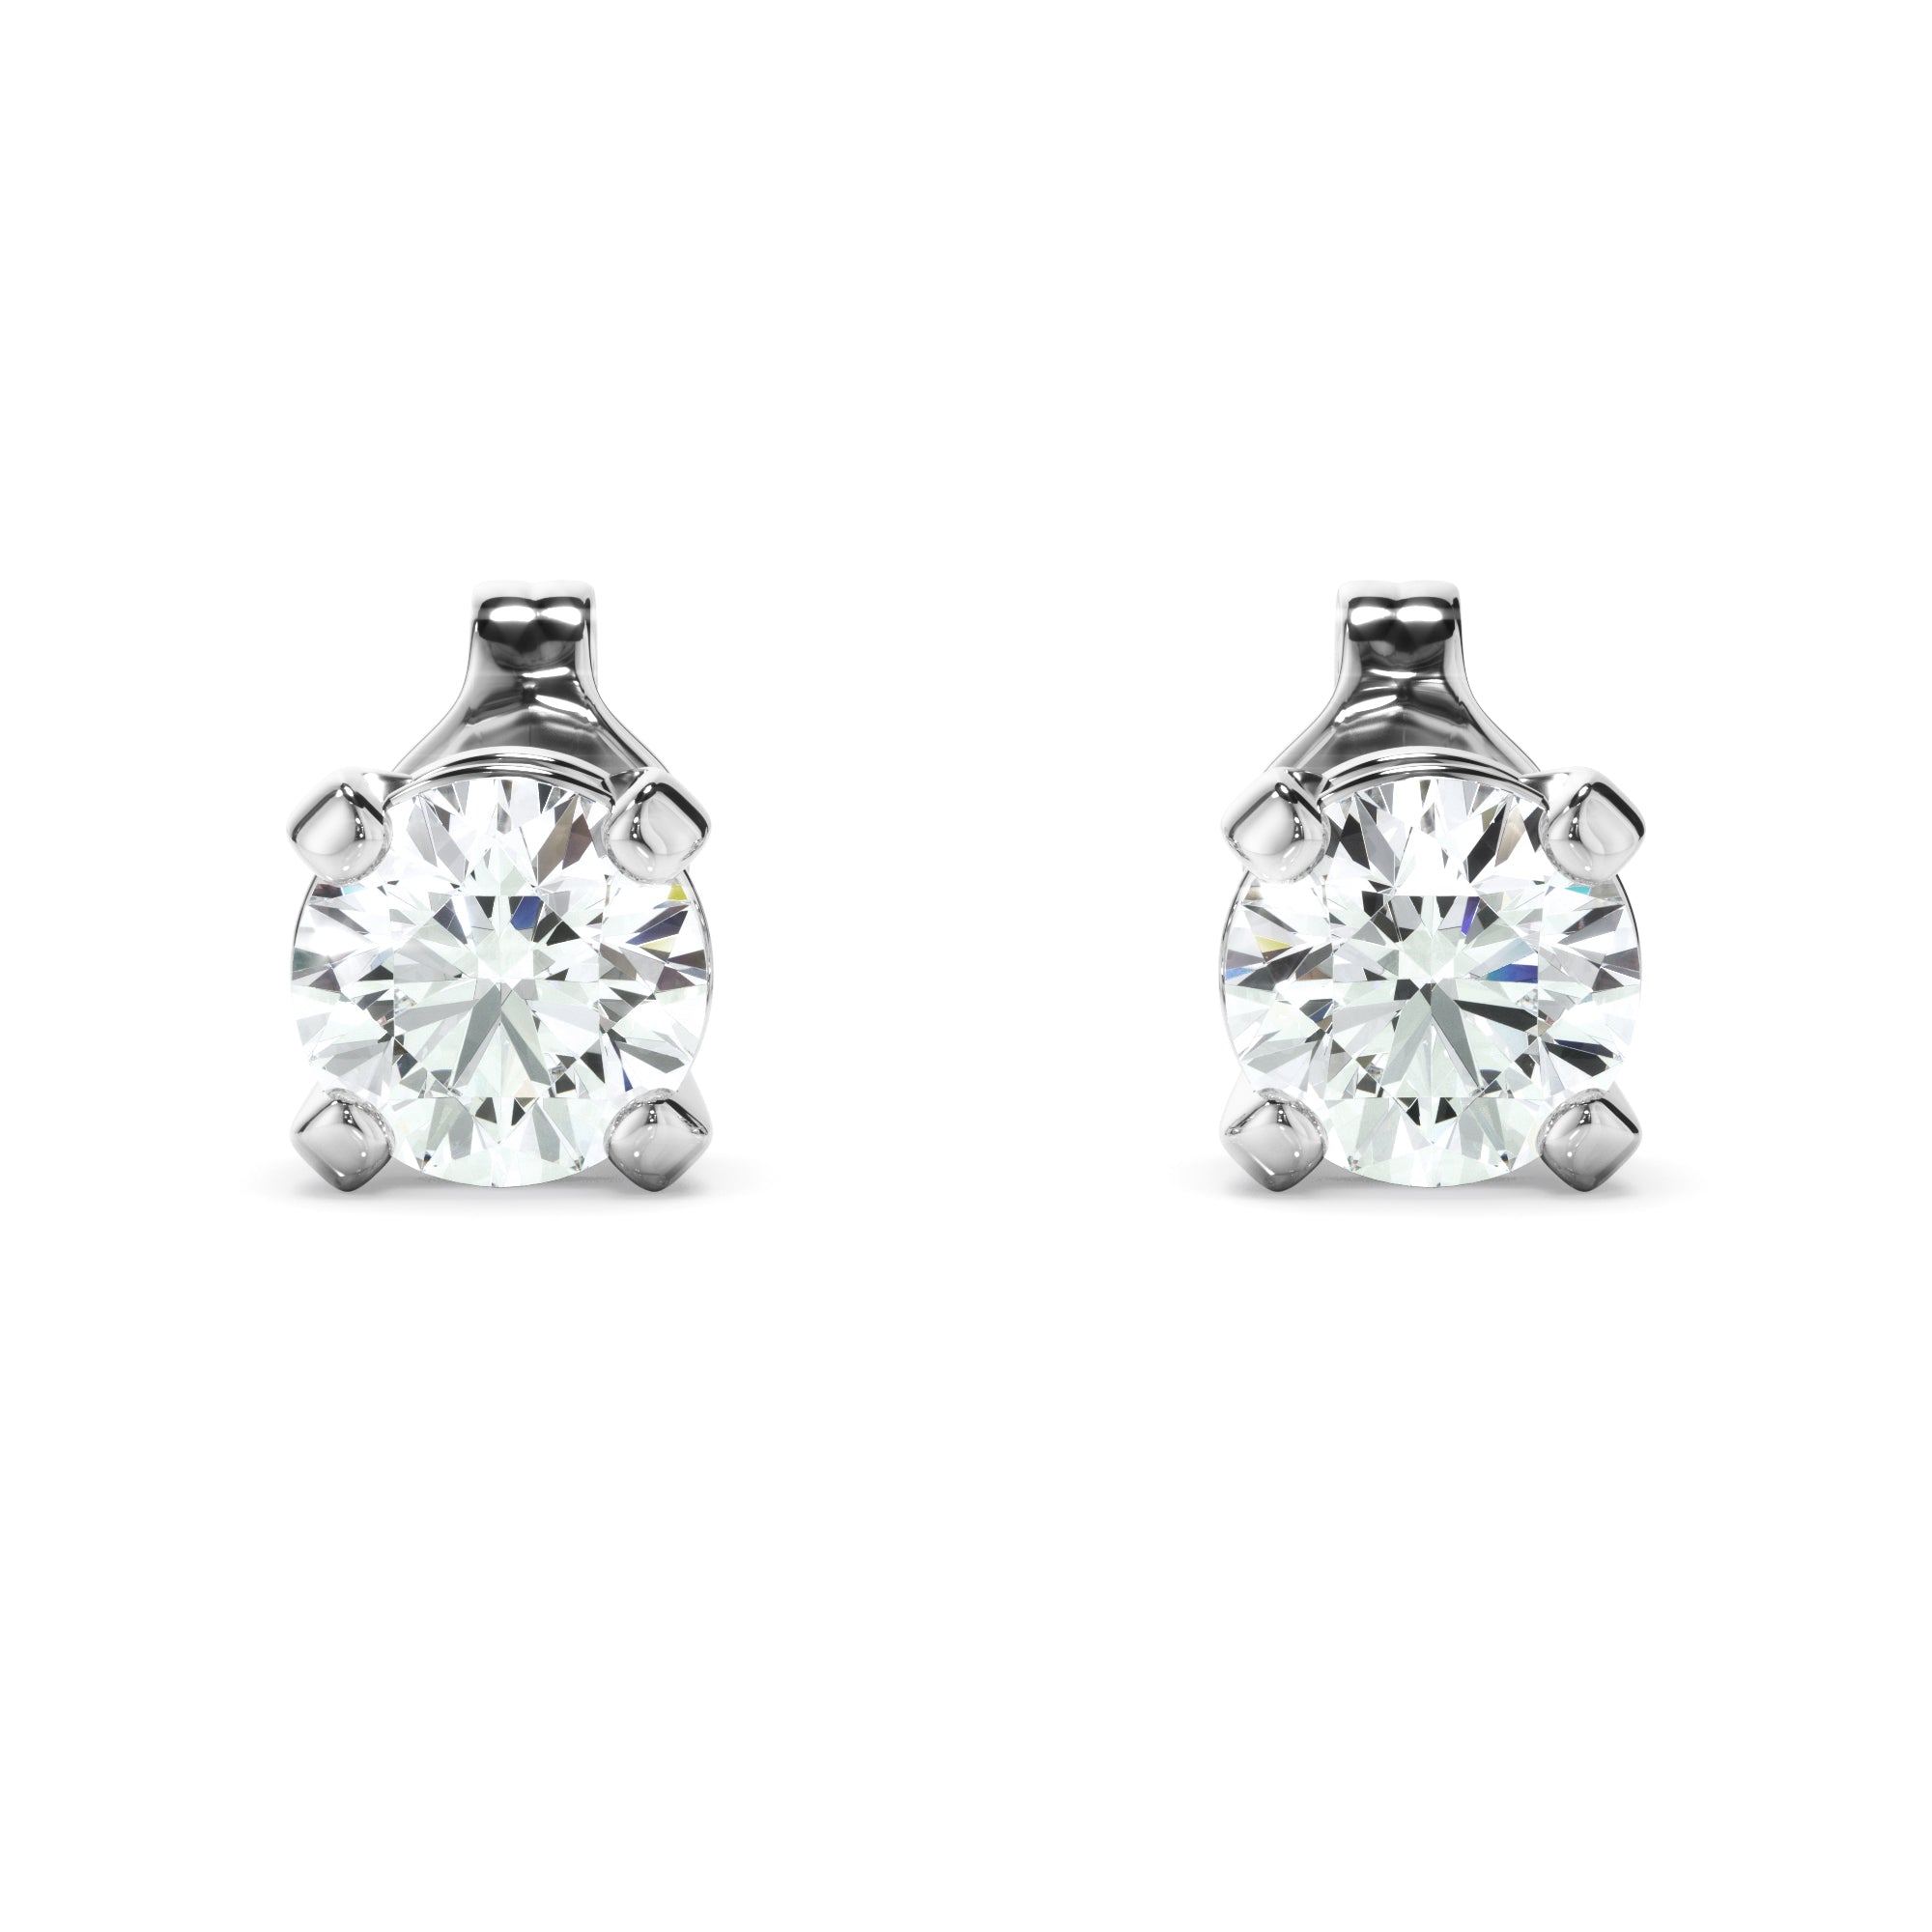 Forget-Me-Not 14k White Gold LAB Diamond Studs 1.50ct